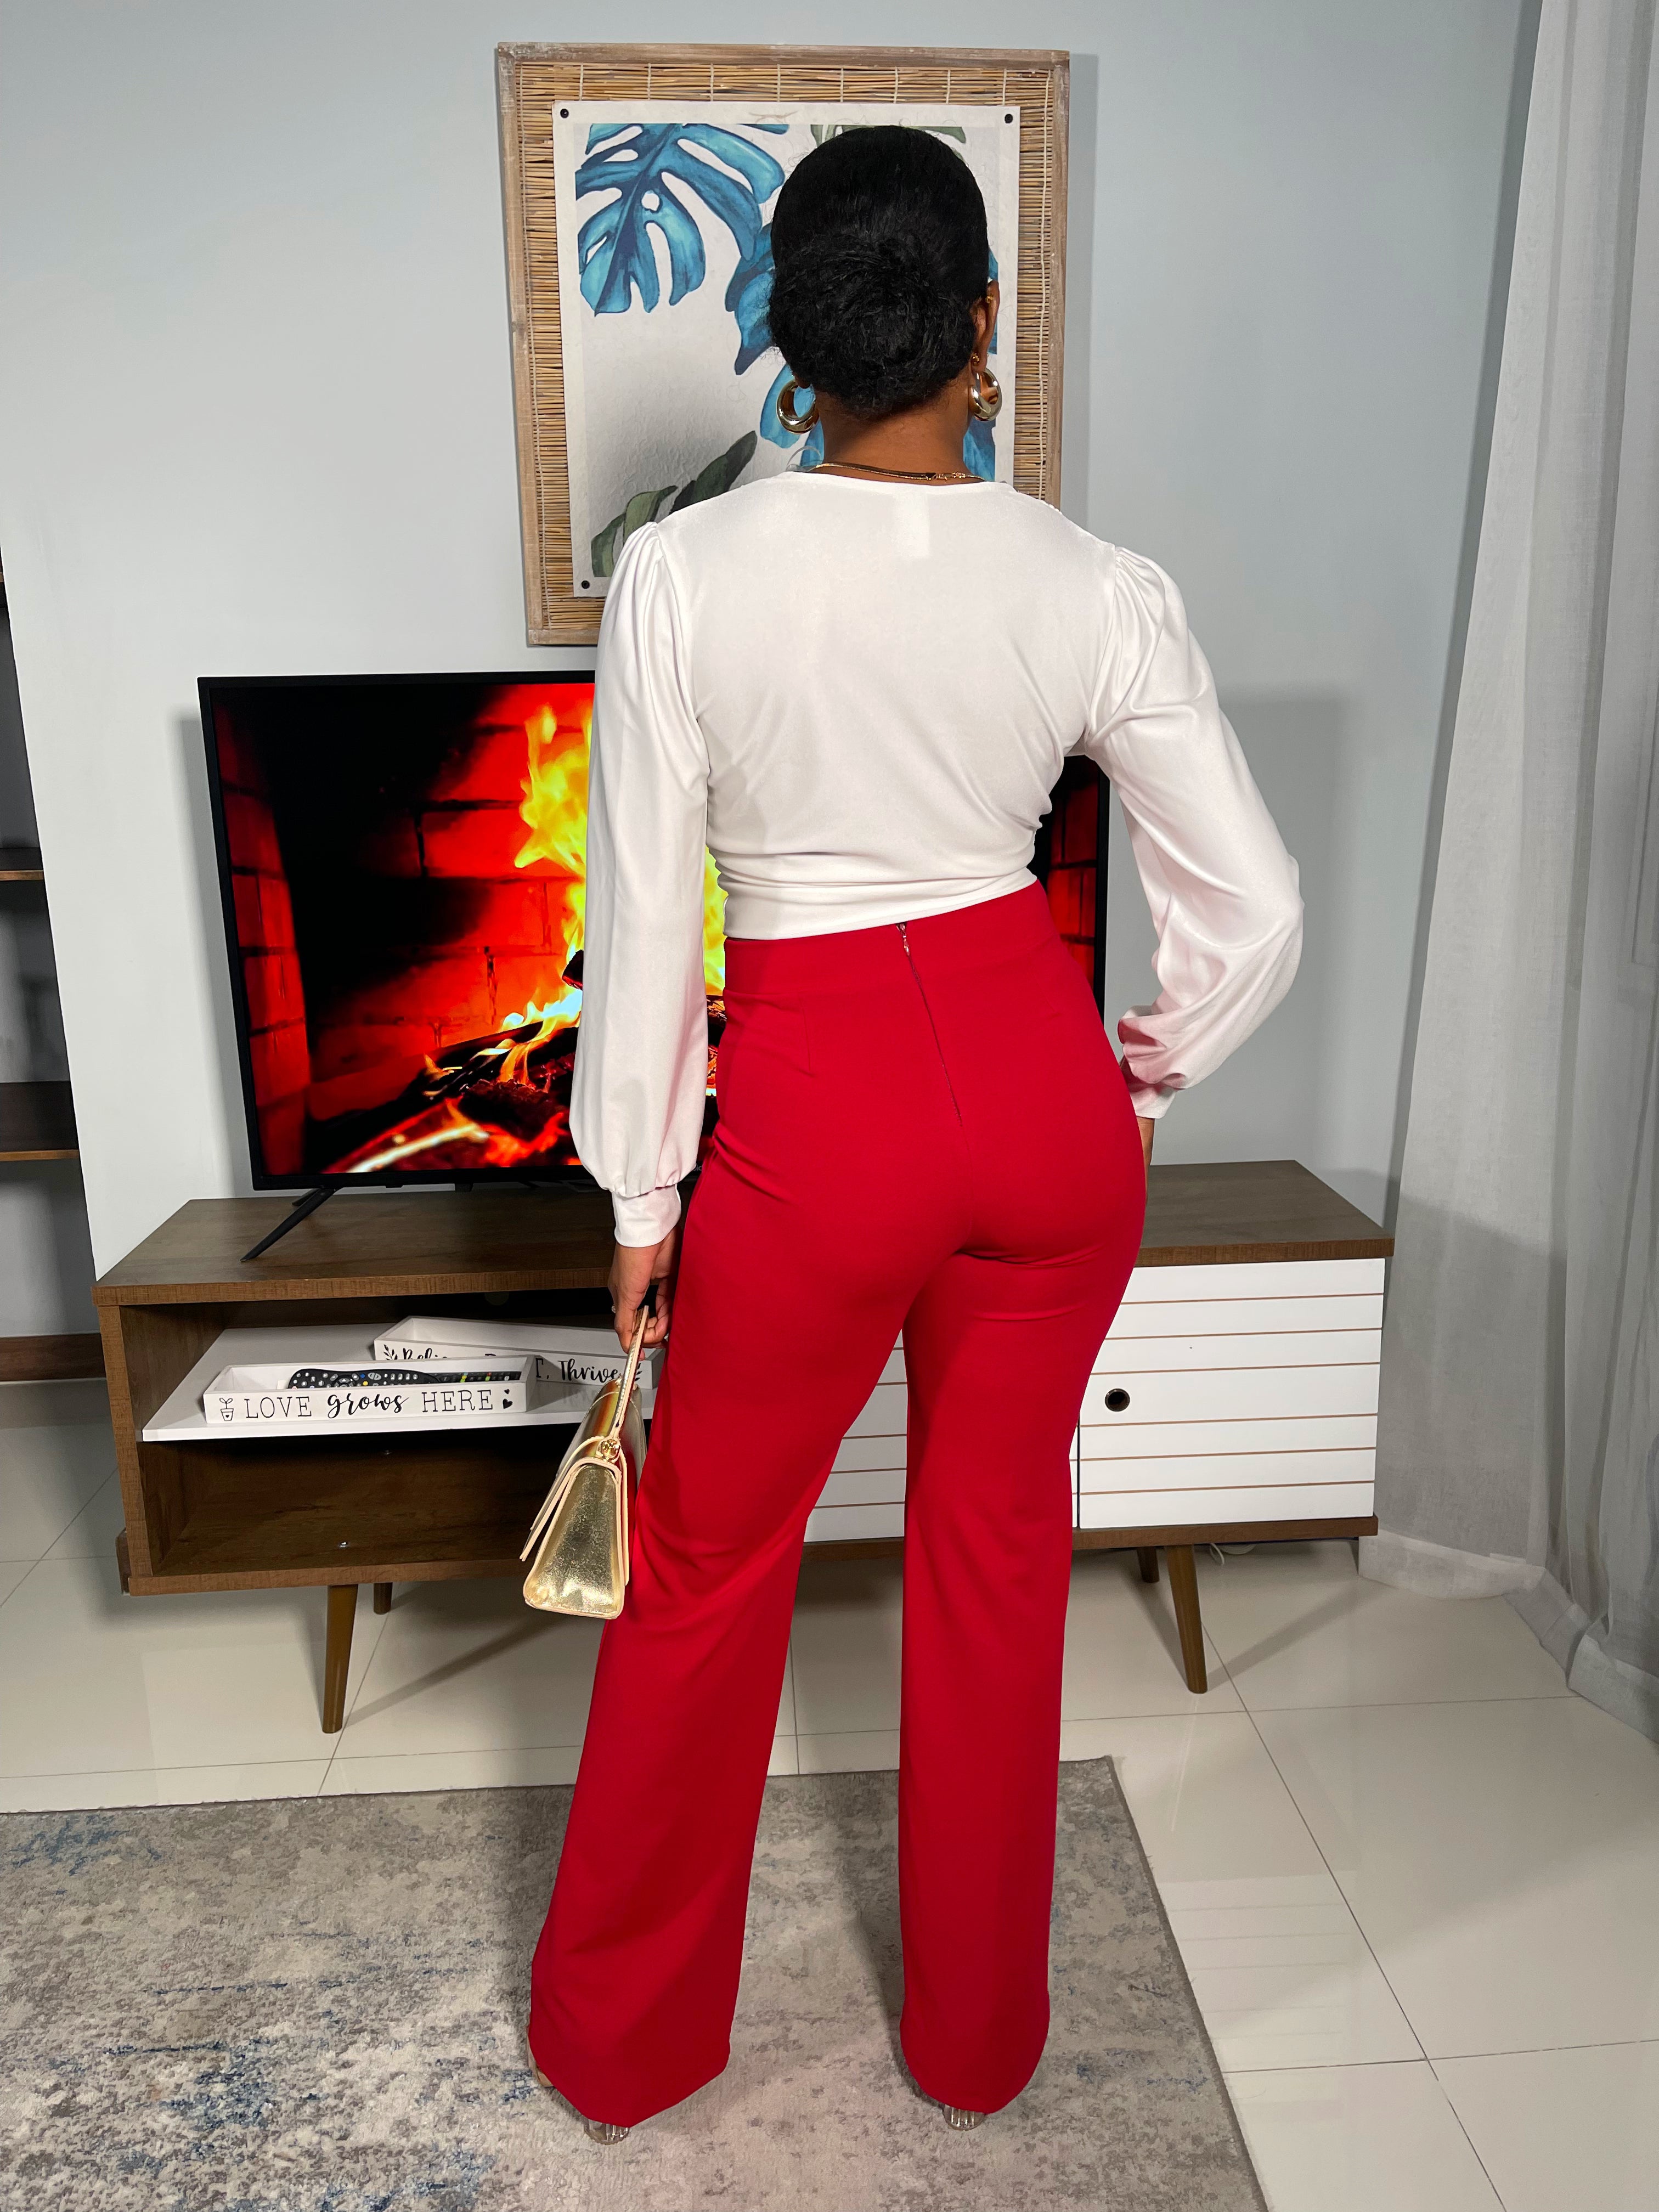 Beth High Waisted Dress Pants-Red - Impoze Style™